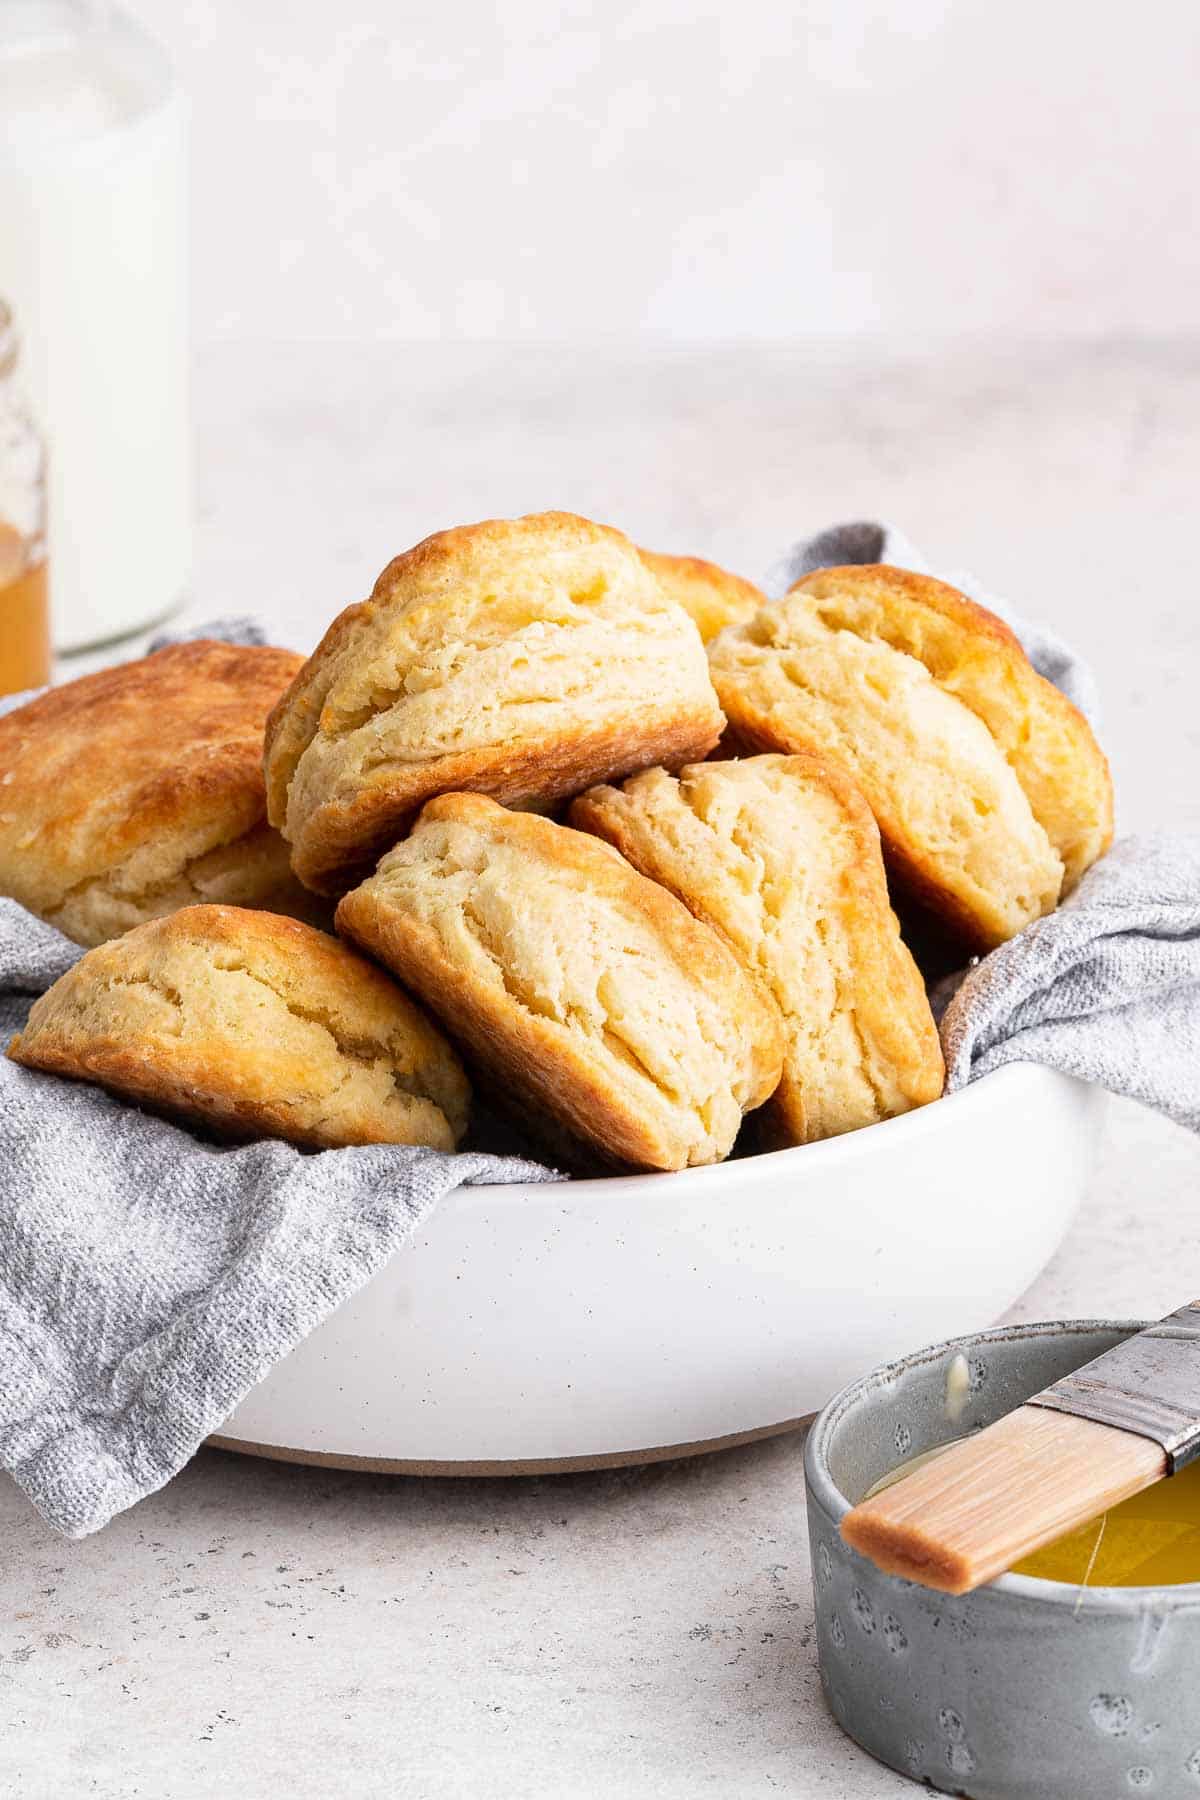 Do-it-yourself Buttermilk Biscuits from Scratch - Tasty Made Simple